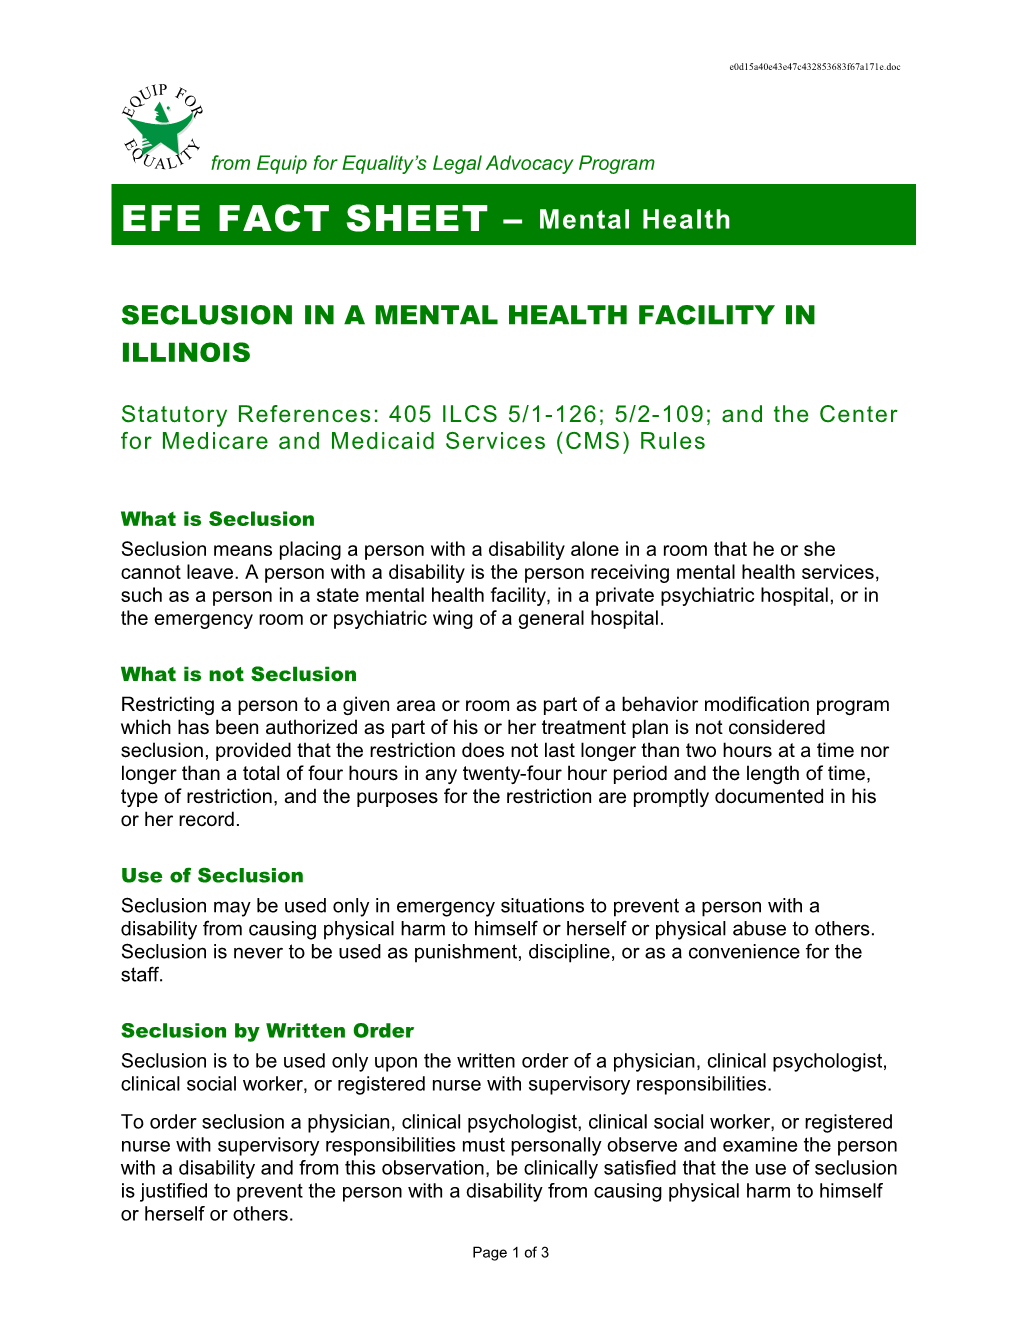 Fact Sheet Seclusion (Revised)